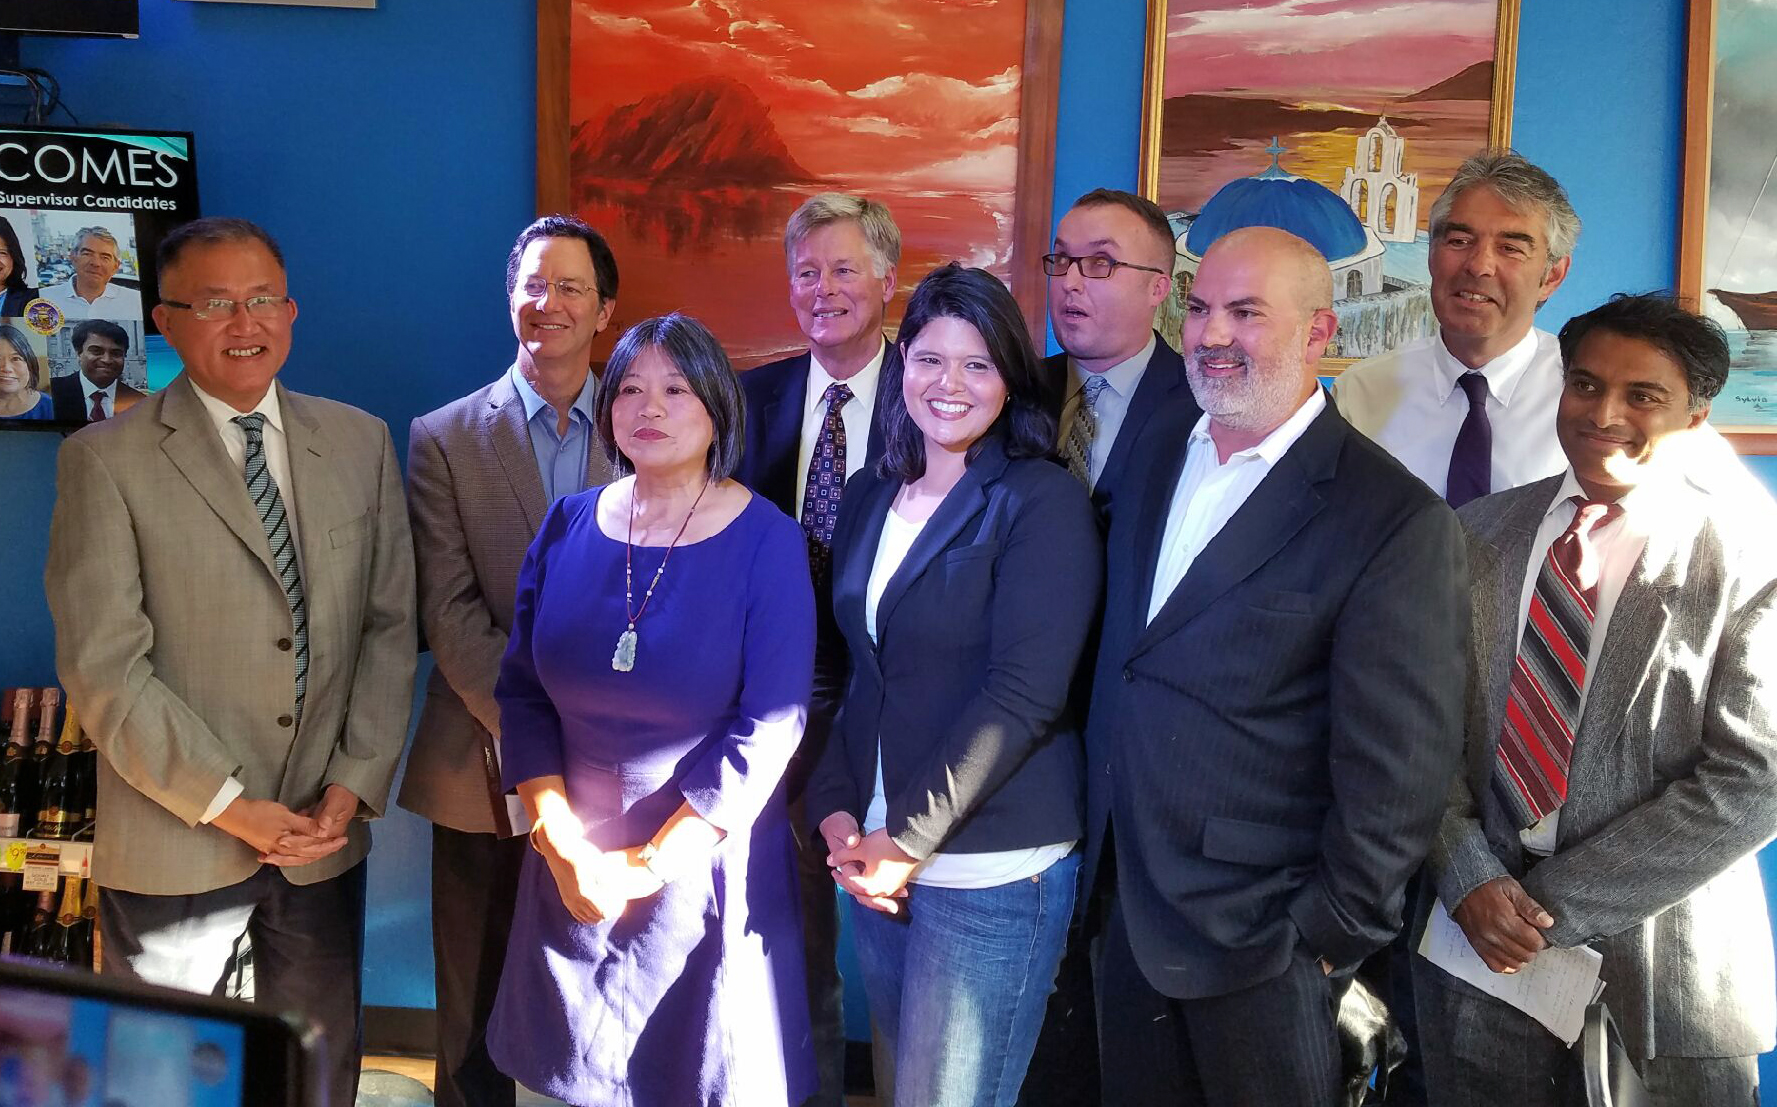 District 1 Supervisor candidates pose for a group photo at the Kawika's Ocean Beach Deli meet and greet event on June 23, 2016.